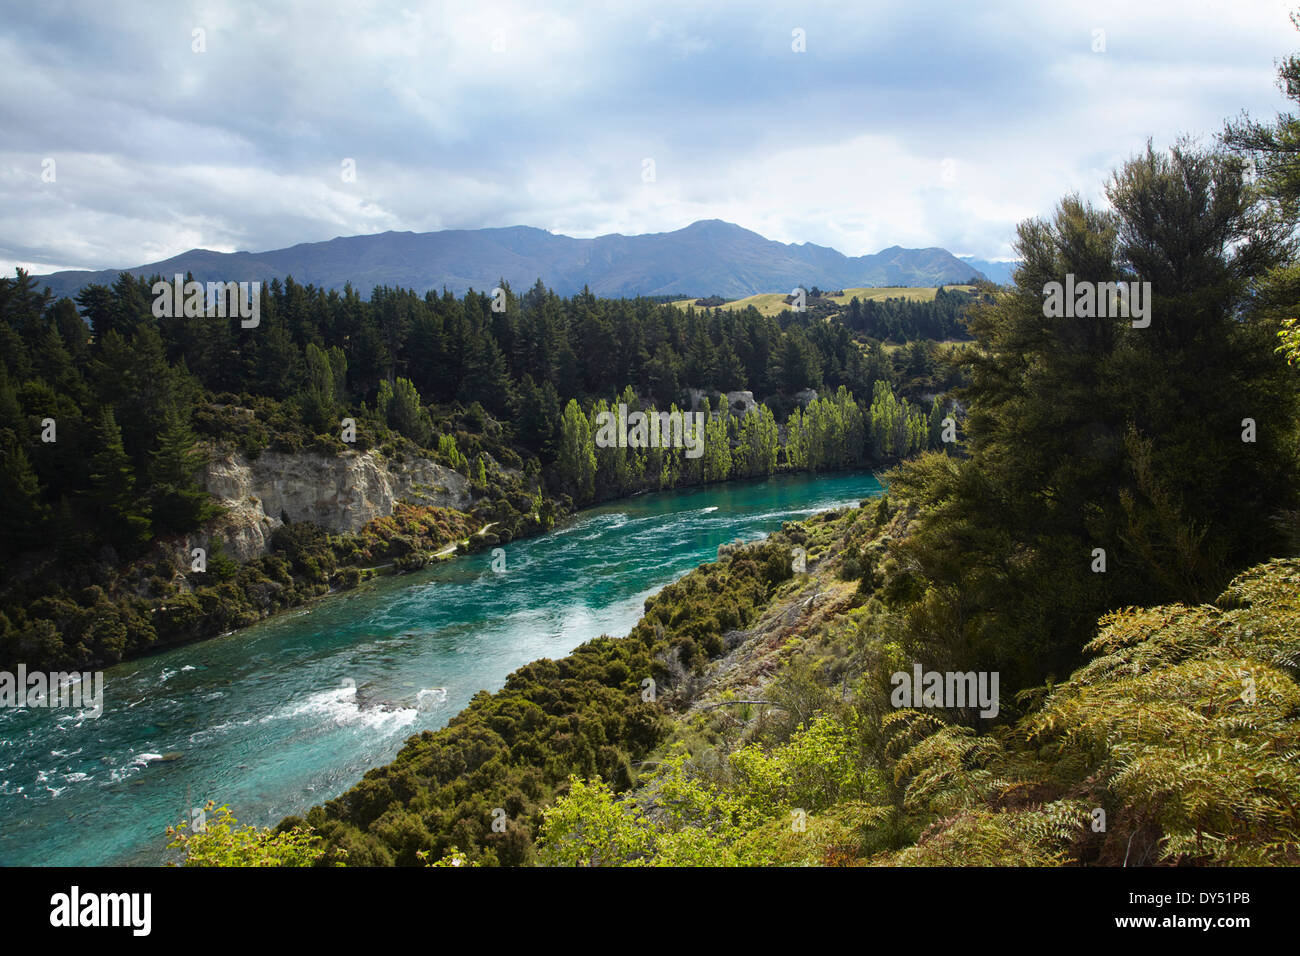 Scenic view of river, forest and mountains, New Zealand Stock Photo